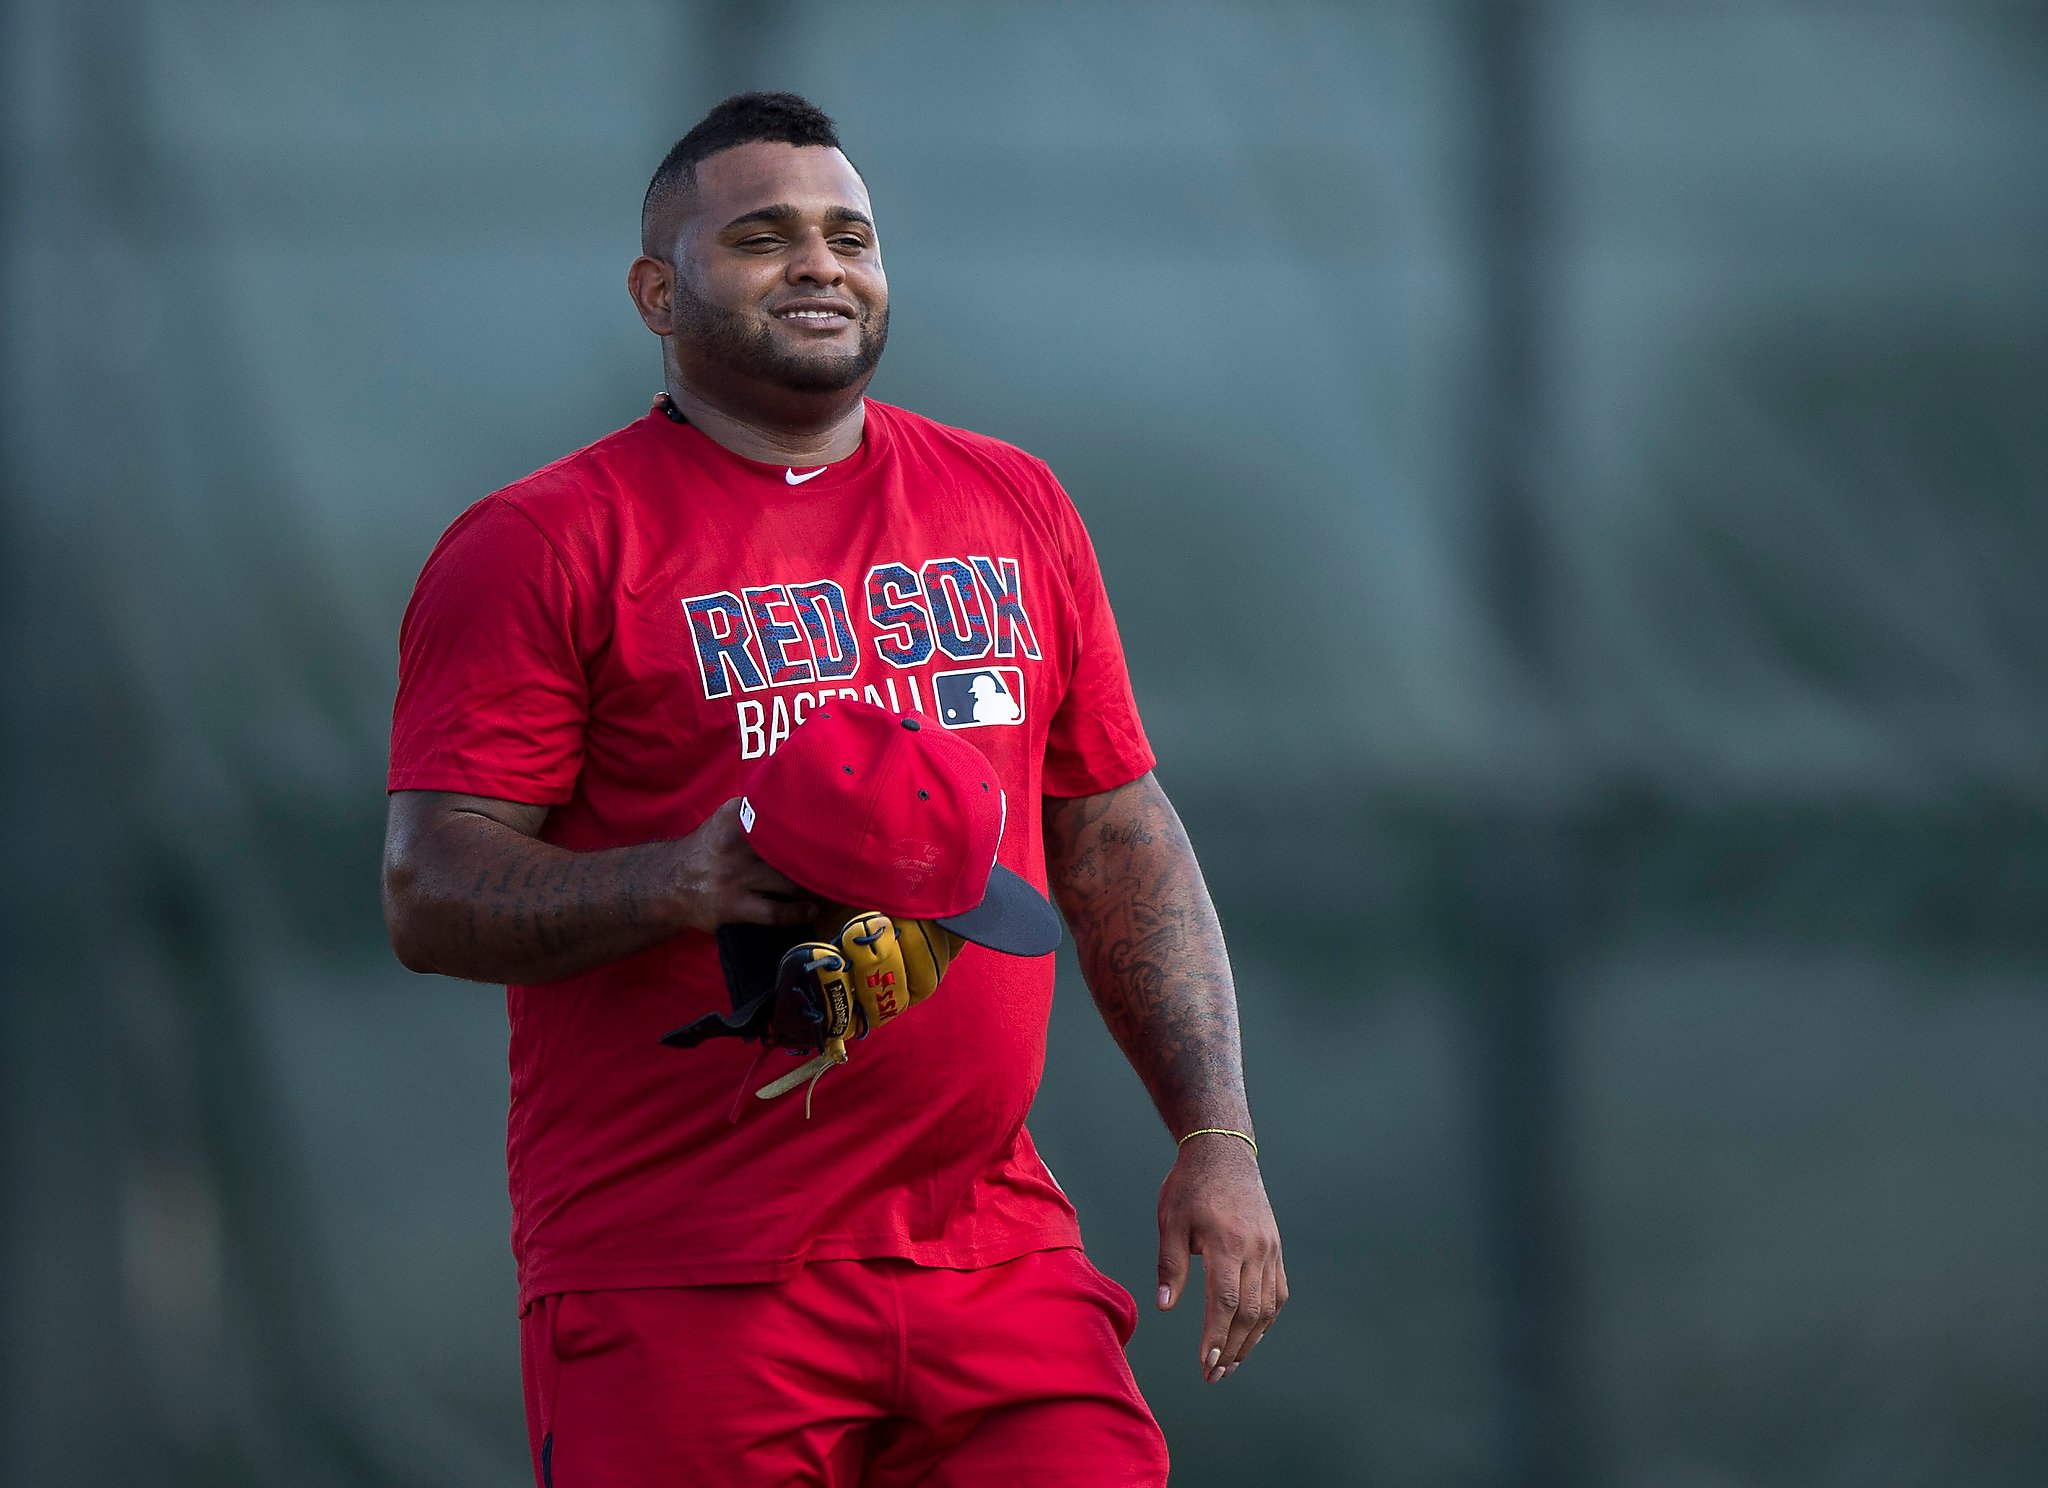 That's a weight loss home run! Red Sox third baseman Pablo Sandoval shows  off much fitter new physique